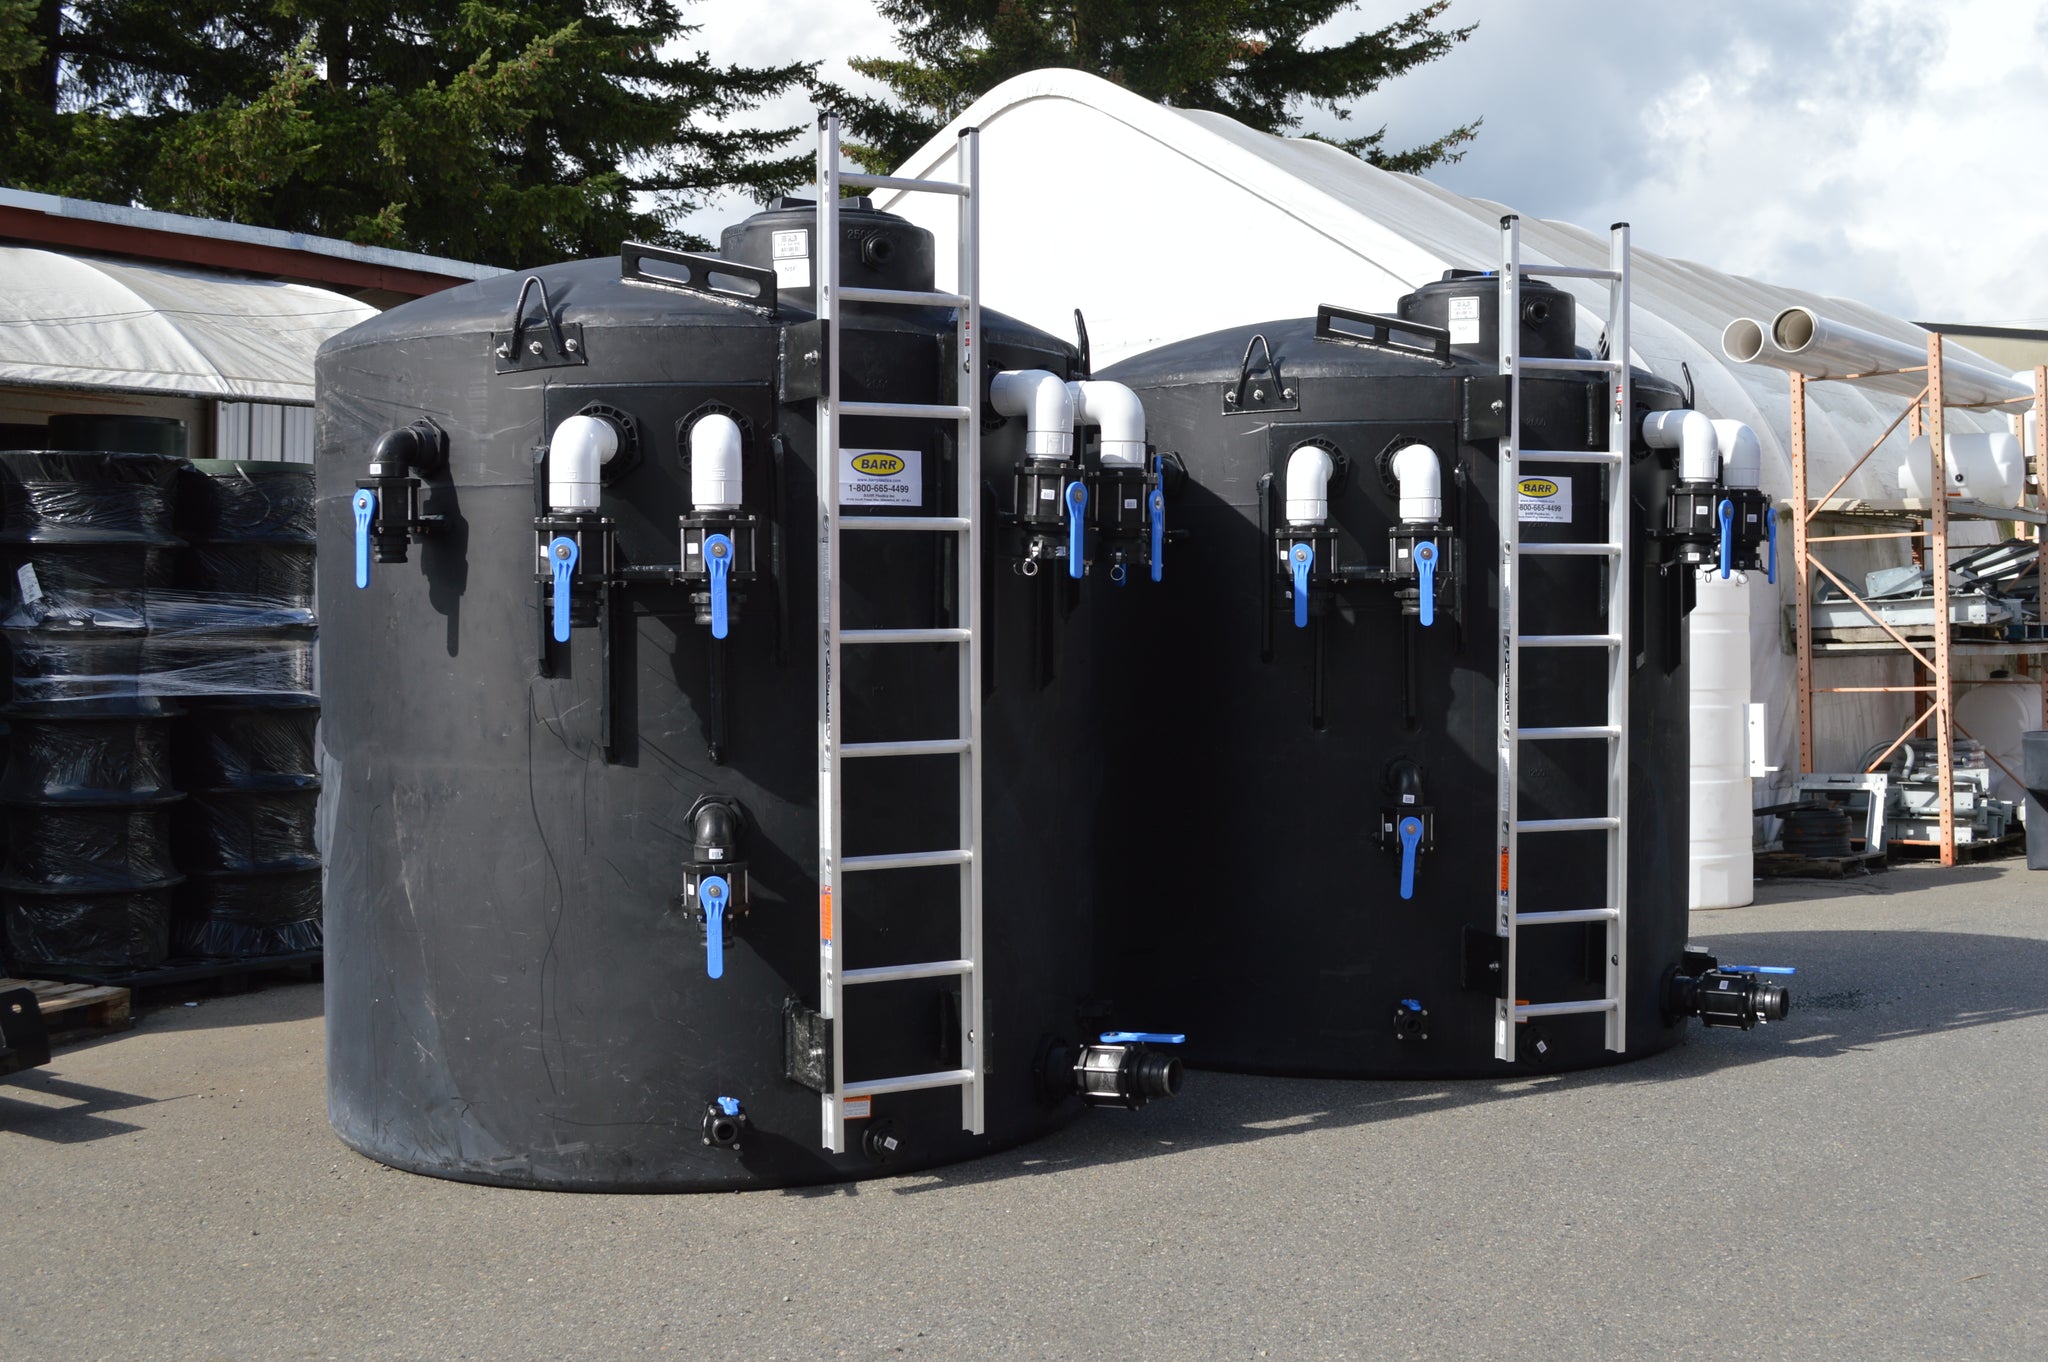 Picture of two mechanical erosion and sediment control tanks. These tanks are fitted with a variety of inlet and outlet fittings, ladders and more.